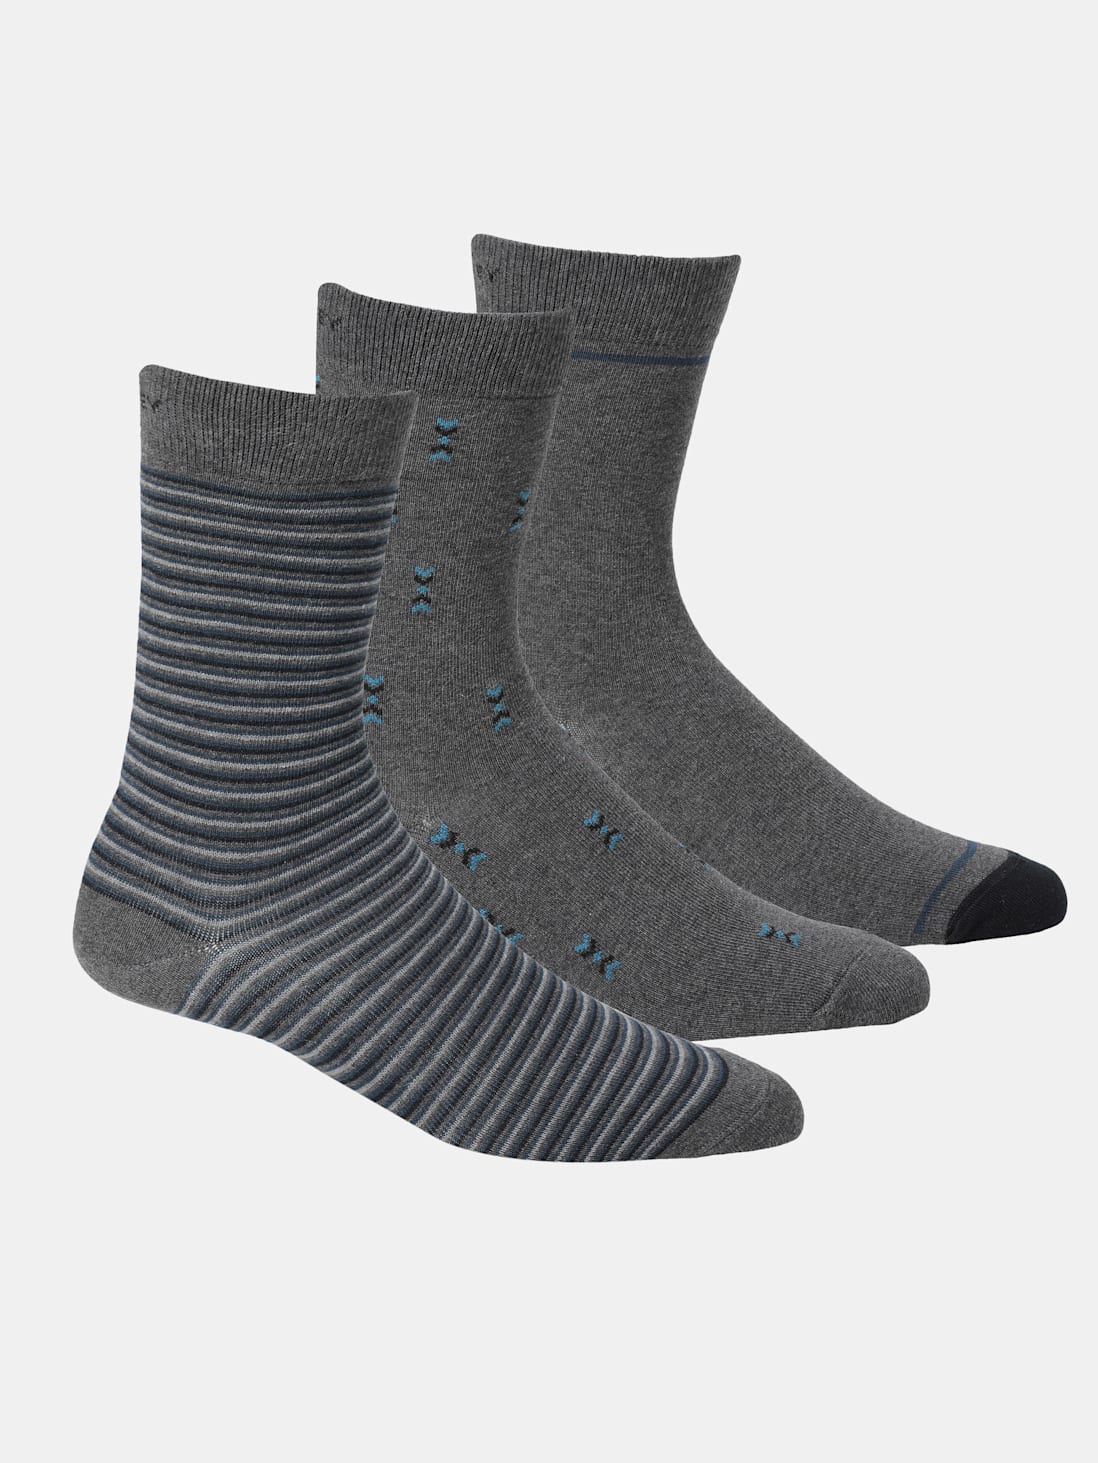 Buy Men's Compact Cotton Stretch Crew Length Socks with Stay Fresh ...